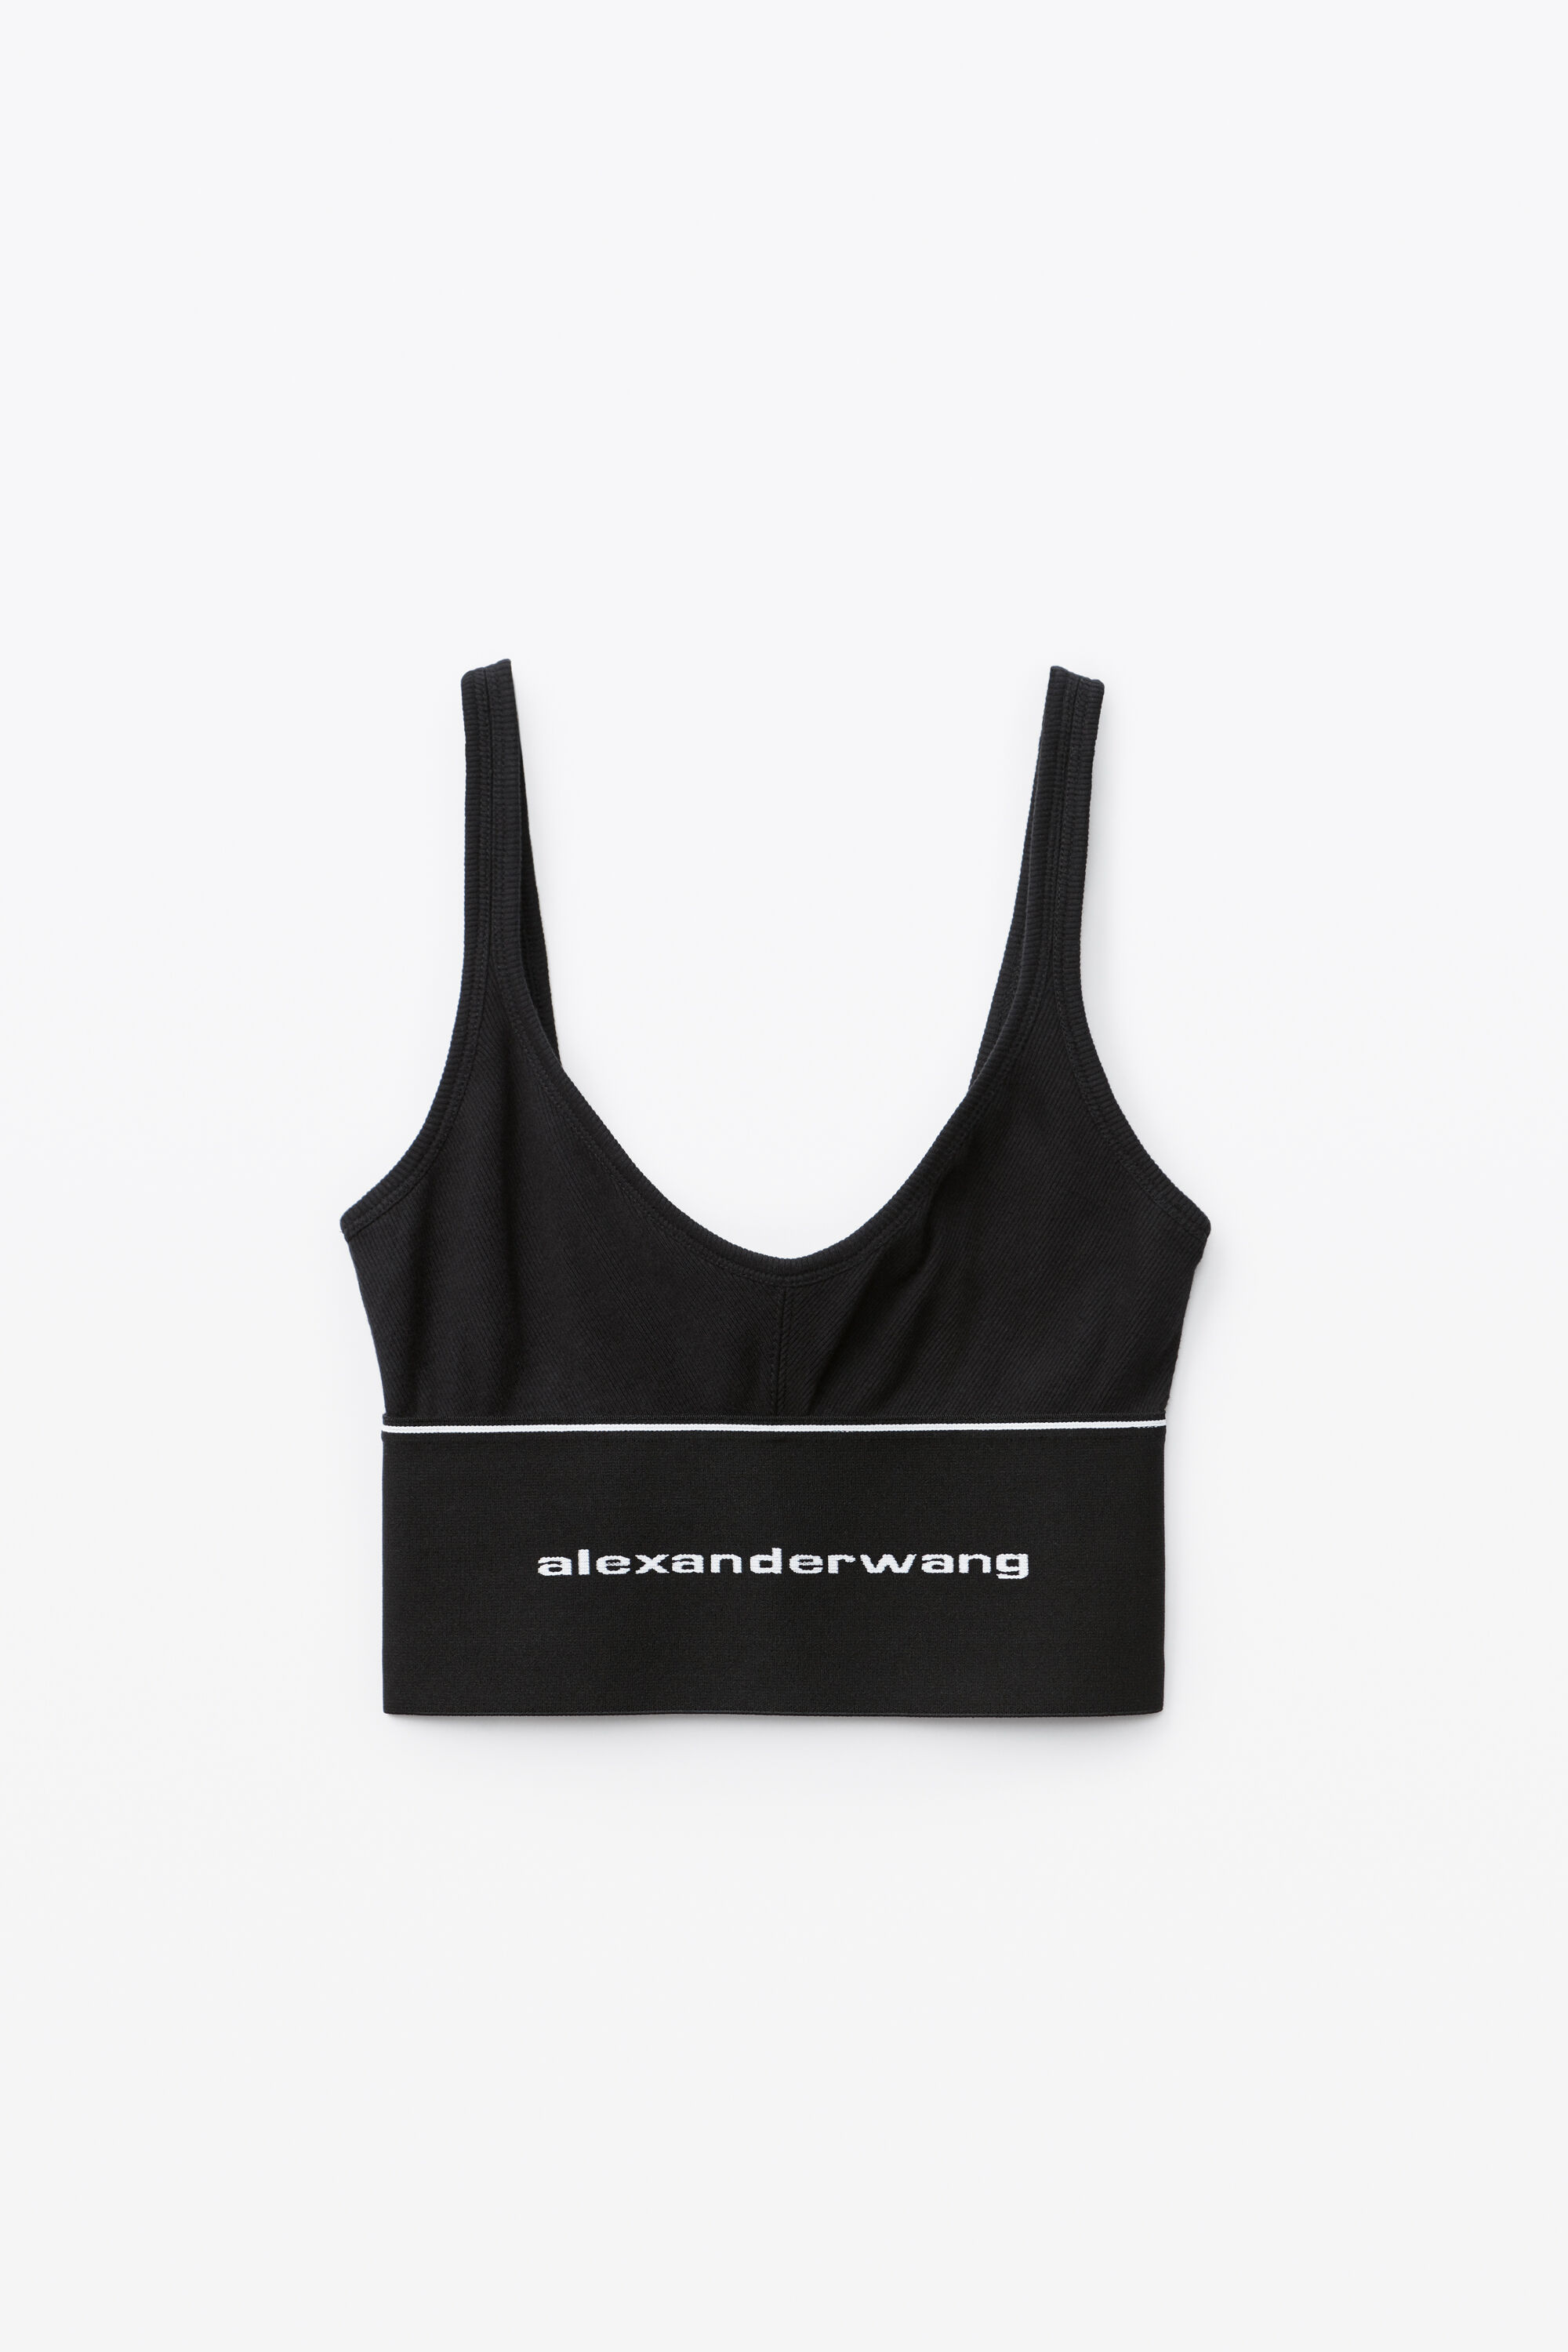 Finding the Look for Less: Alexander Wang's Bralette Crop